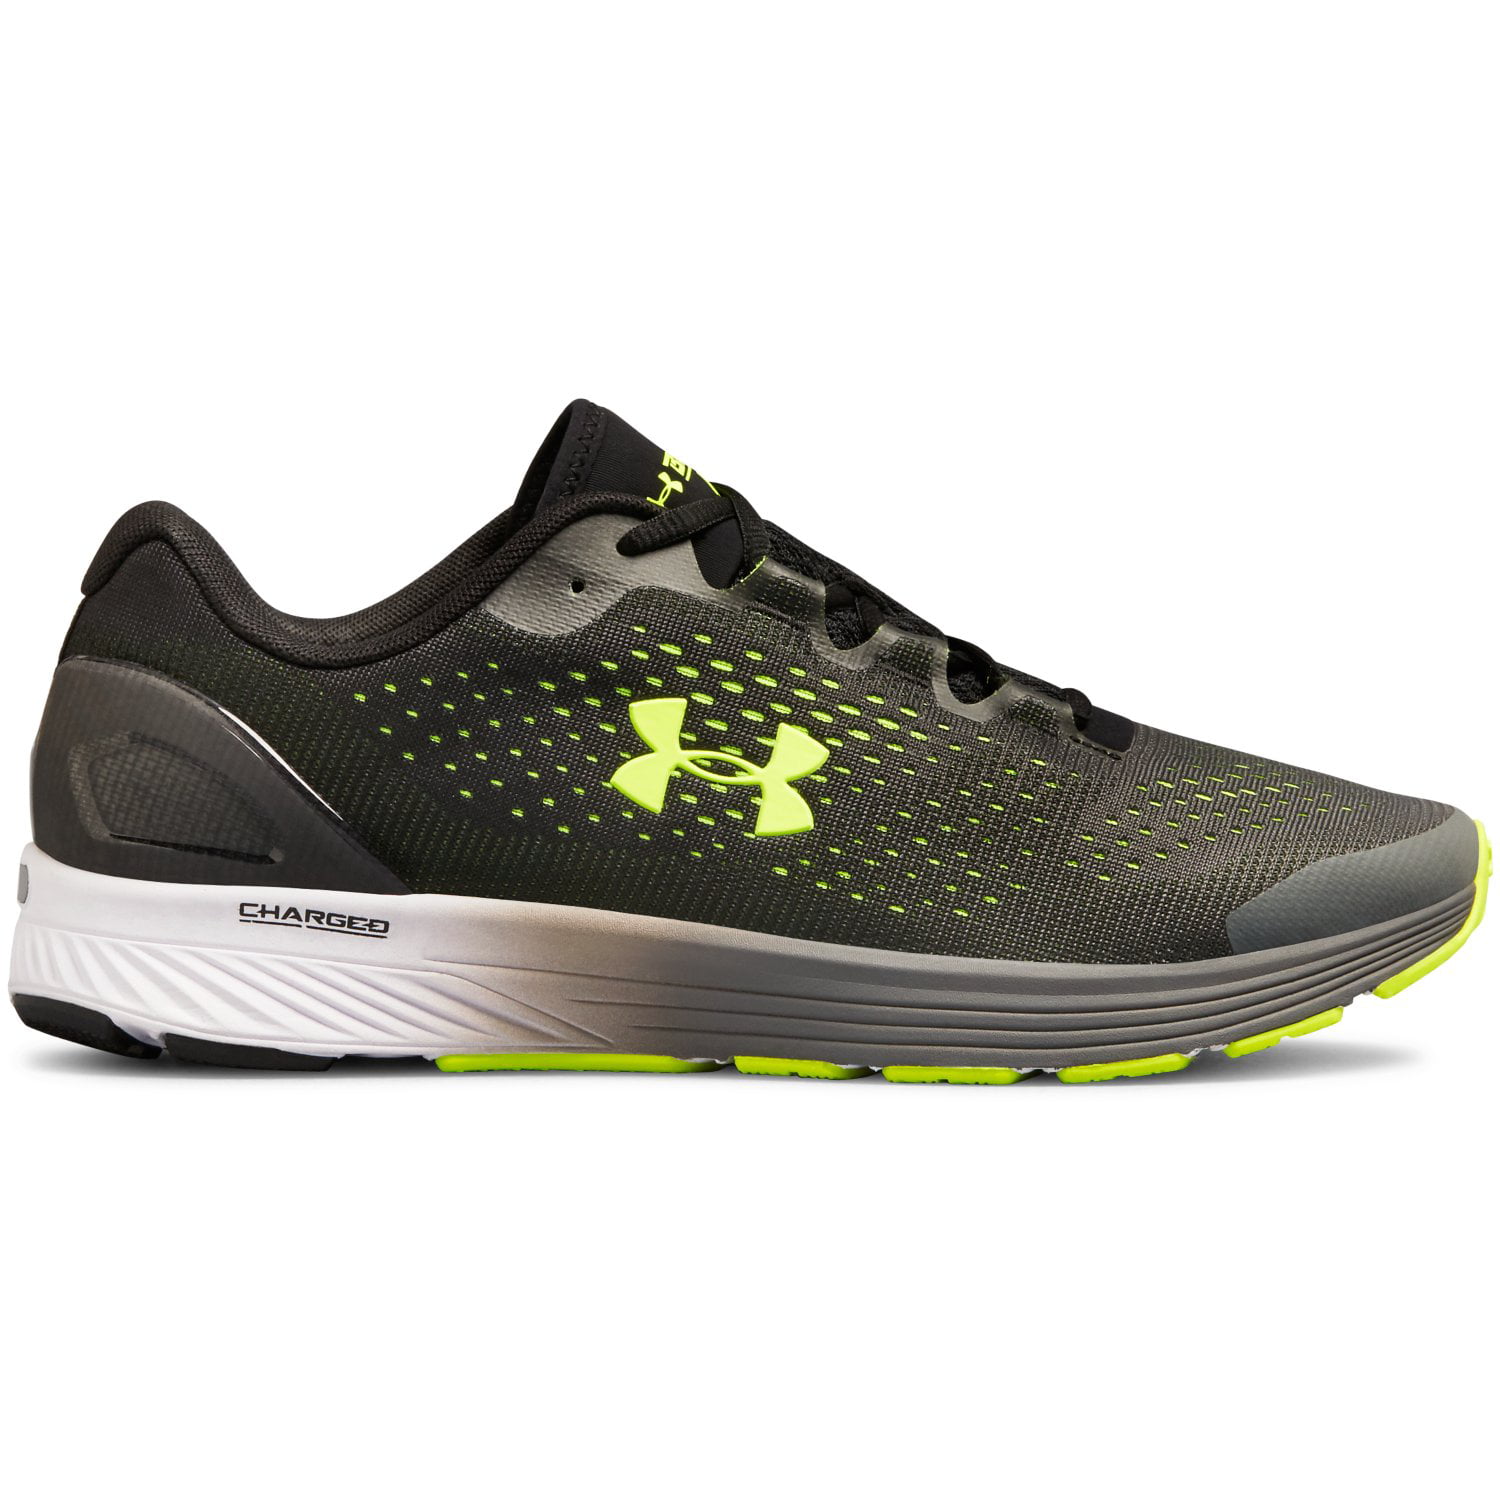 Under Armour Men's Charged Bandit 4 Running Shoe US 10 D Steel M 